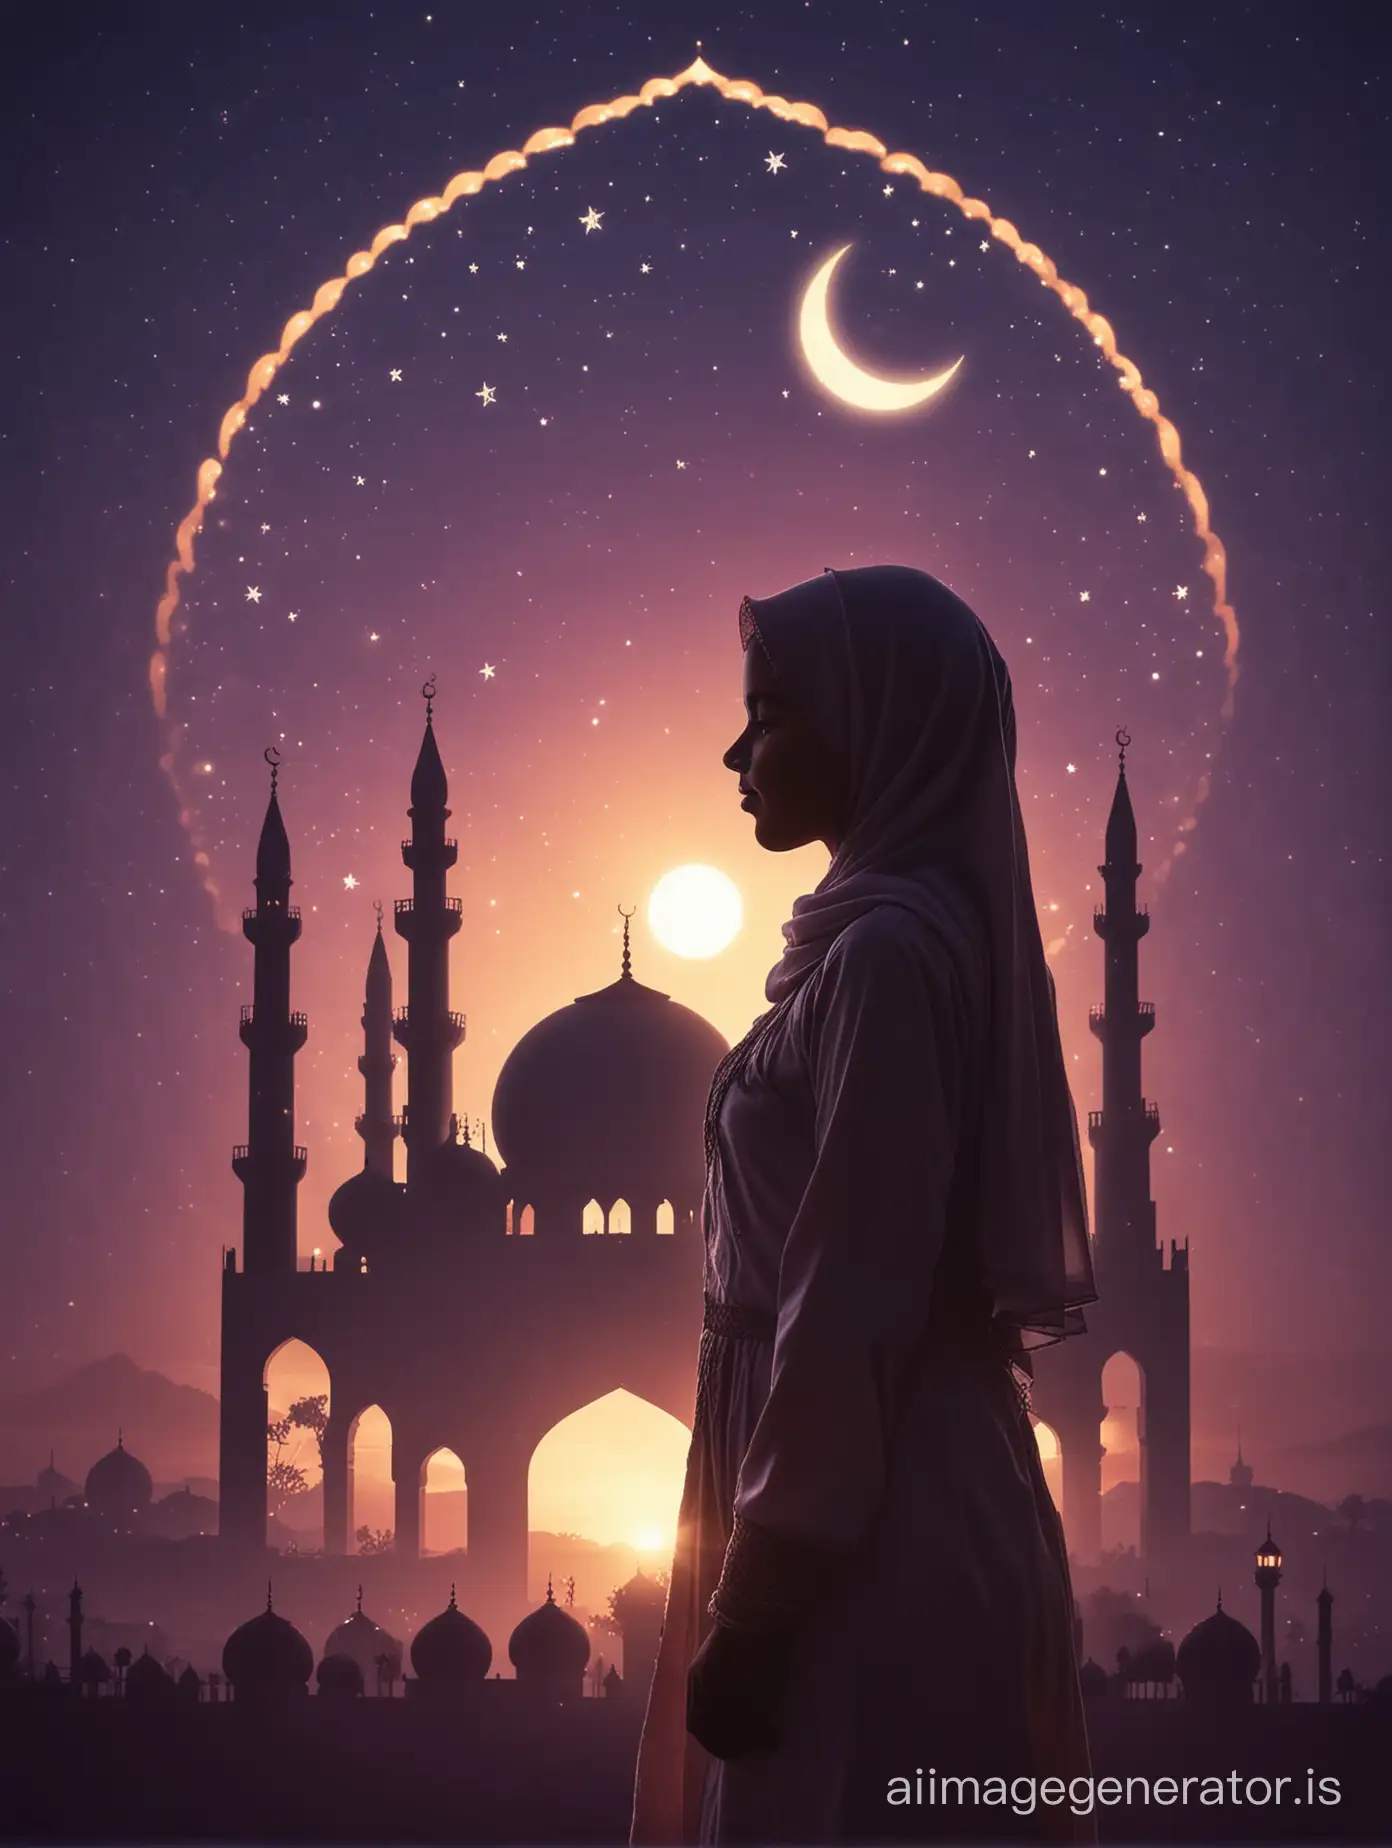 Young-Muslim-Girl-Celebrating-Eid-with-Crescent-Moon-and-Mosque-Silhouette